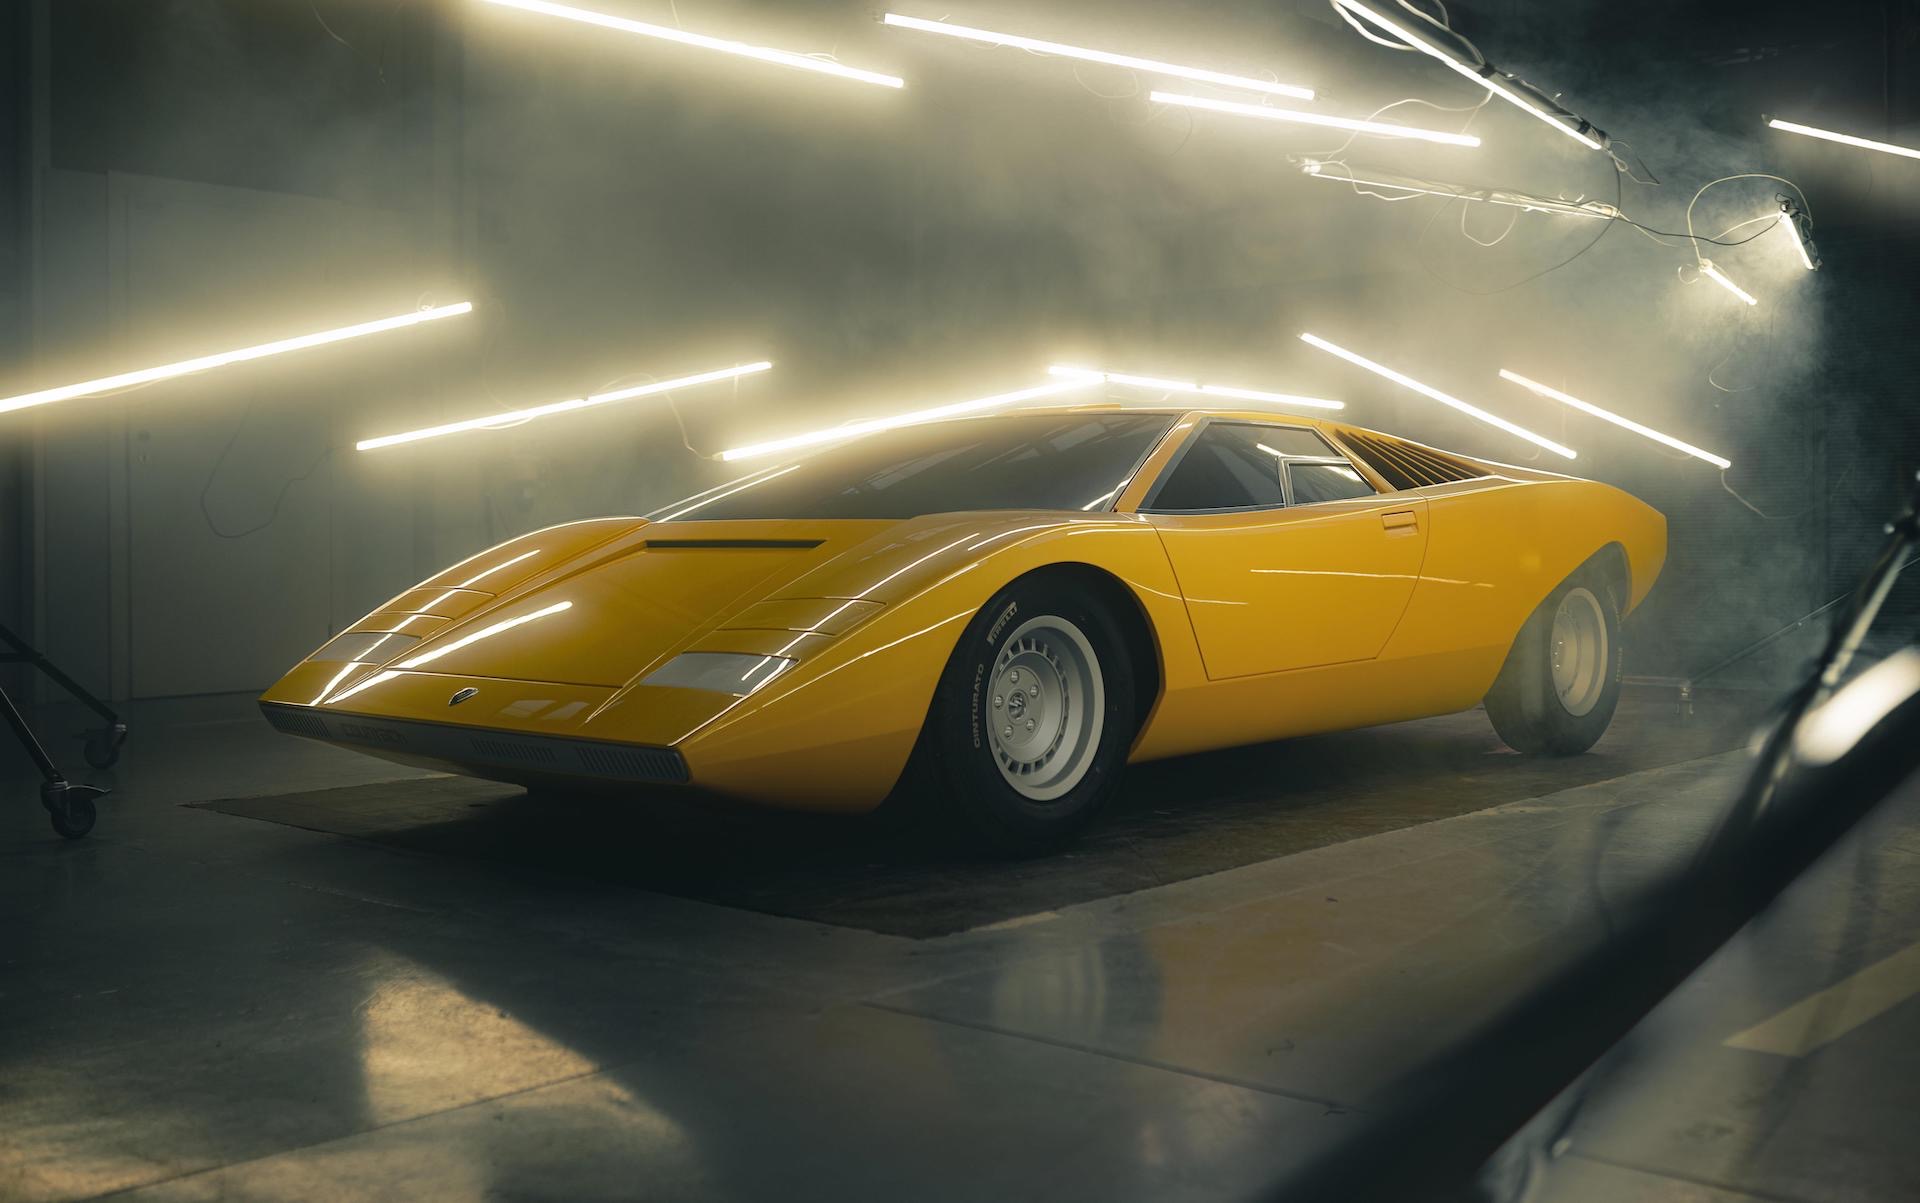 Lamborghini reconstructs first Countach LP-500 concept from 1971